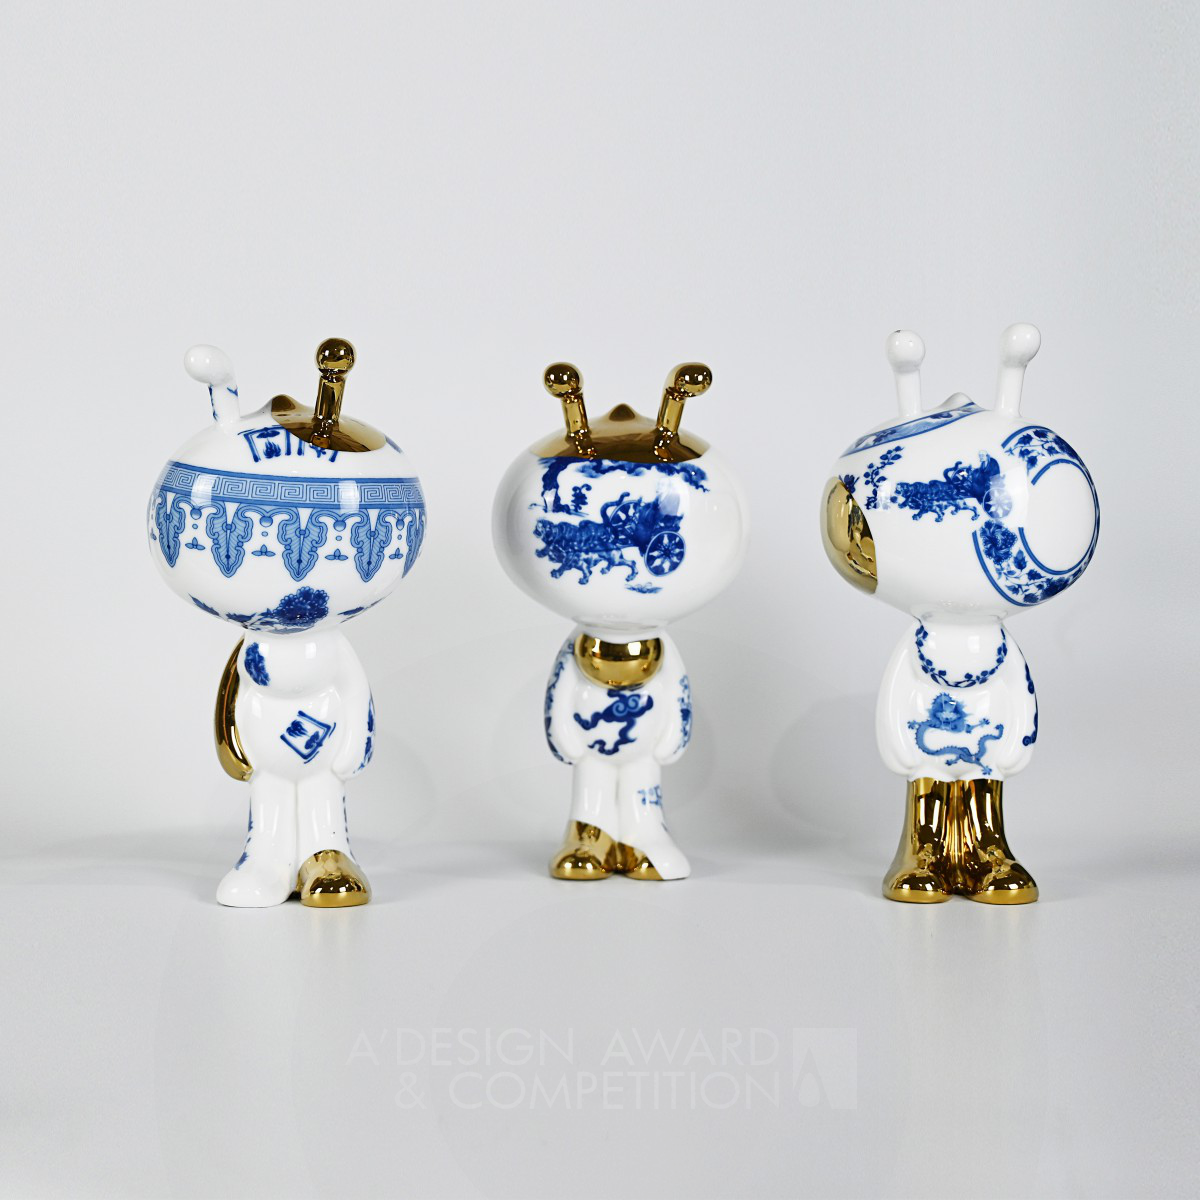 East and West: Ceramic Crafts